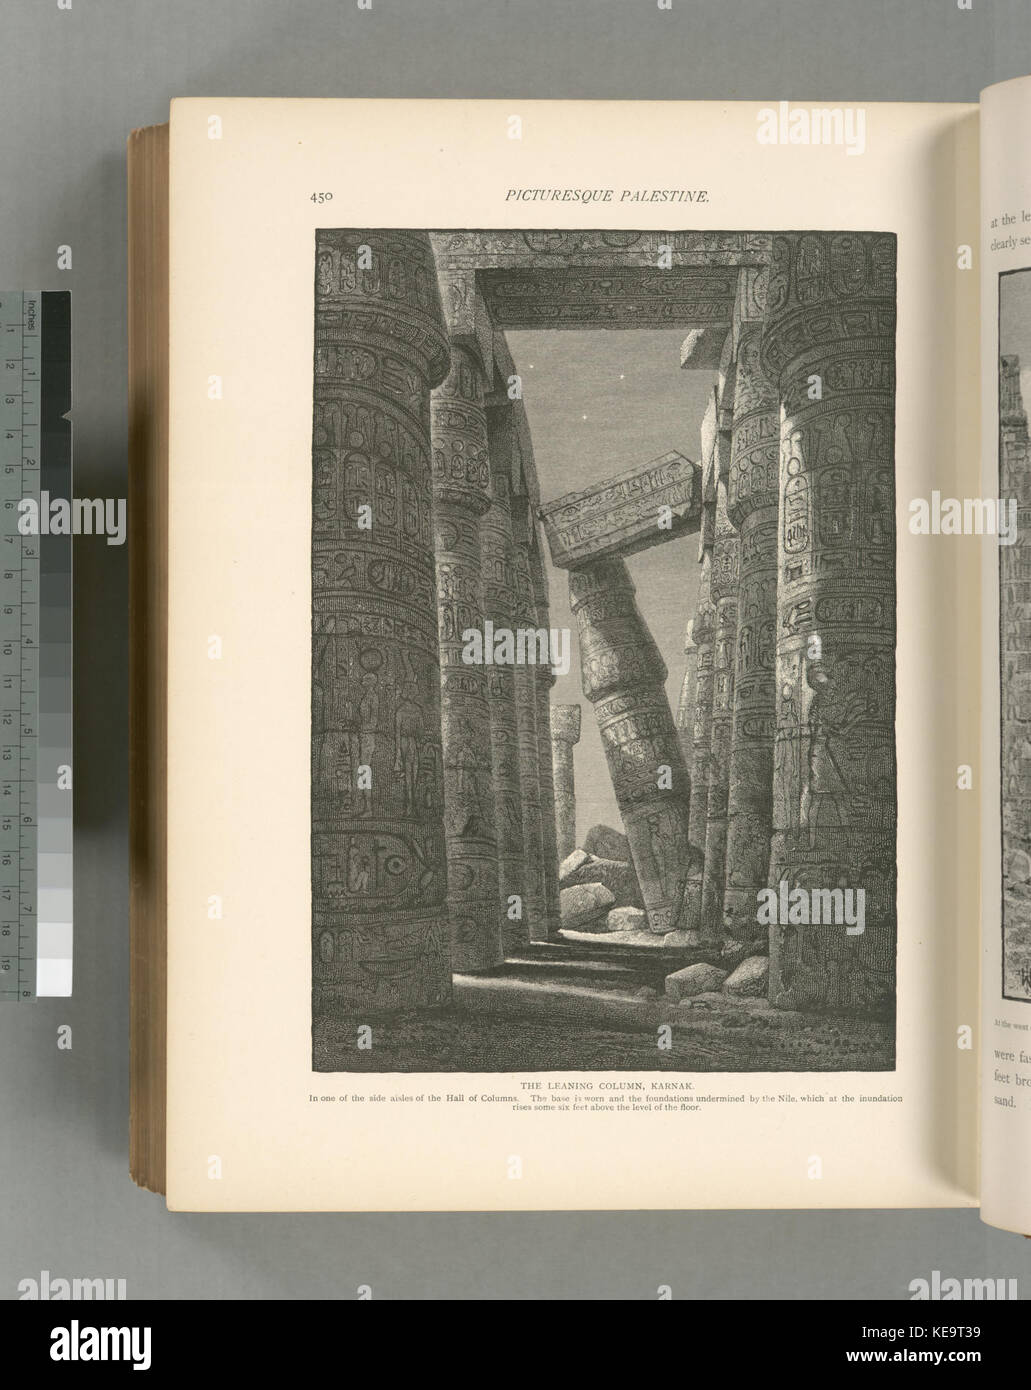 The leaning column, Karnak. In one side of the aisles of the Hall of Columns. The base is worn and the foundations undermined by the Nile, which at the inundation rises some six feet above (NYPL b10607452 80850) Stock Photo